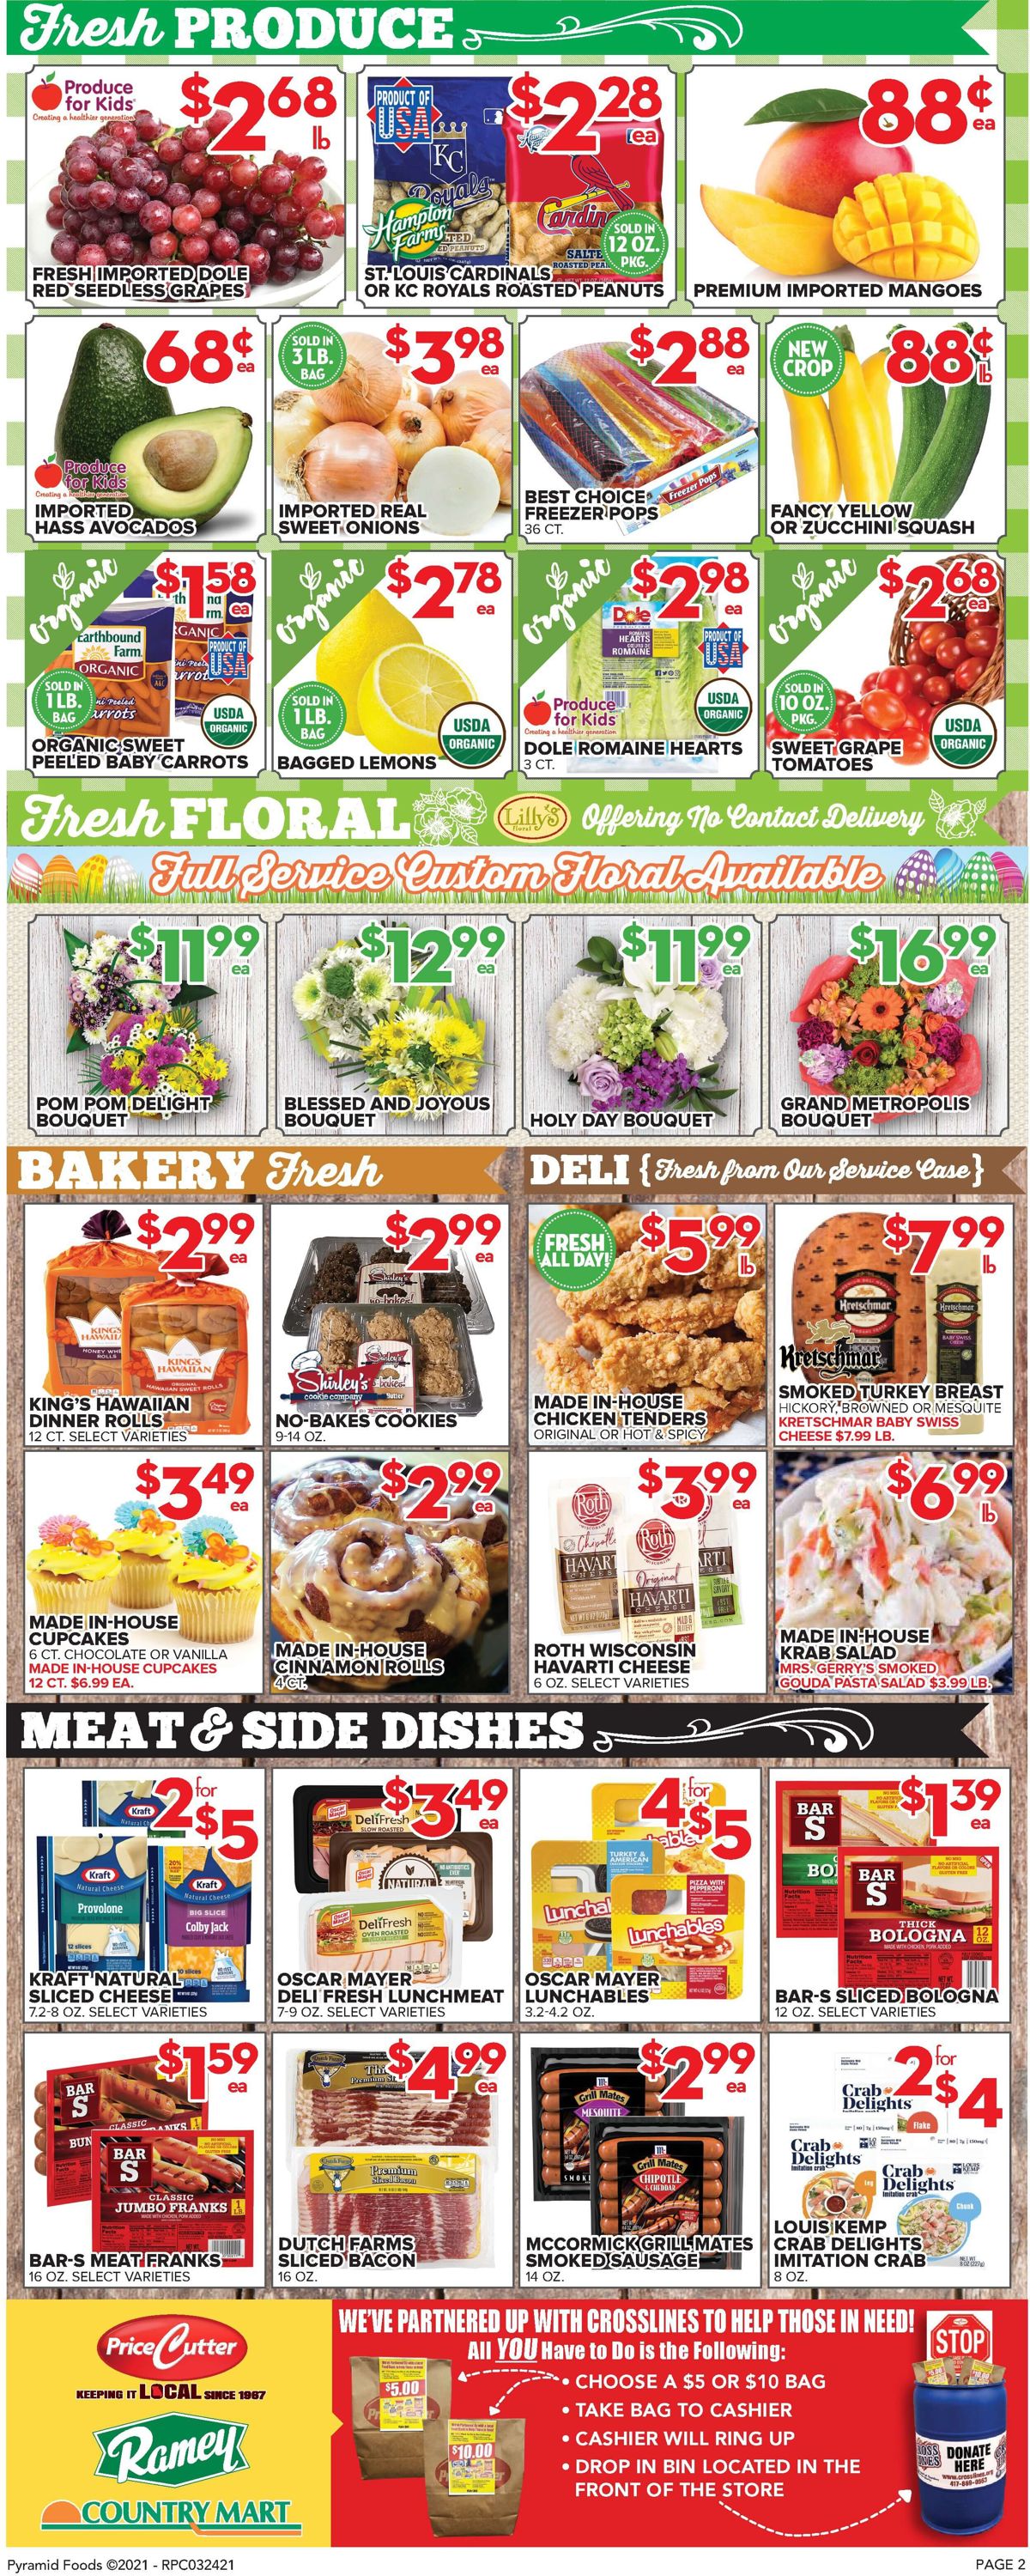 Price Cutter - Easter 2021 Ad Weekly Ad Circular - valid 03/24-03/30/2021 (Page 2)